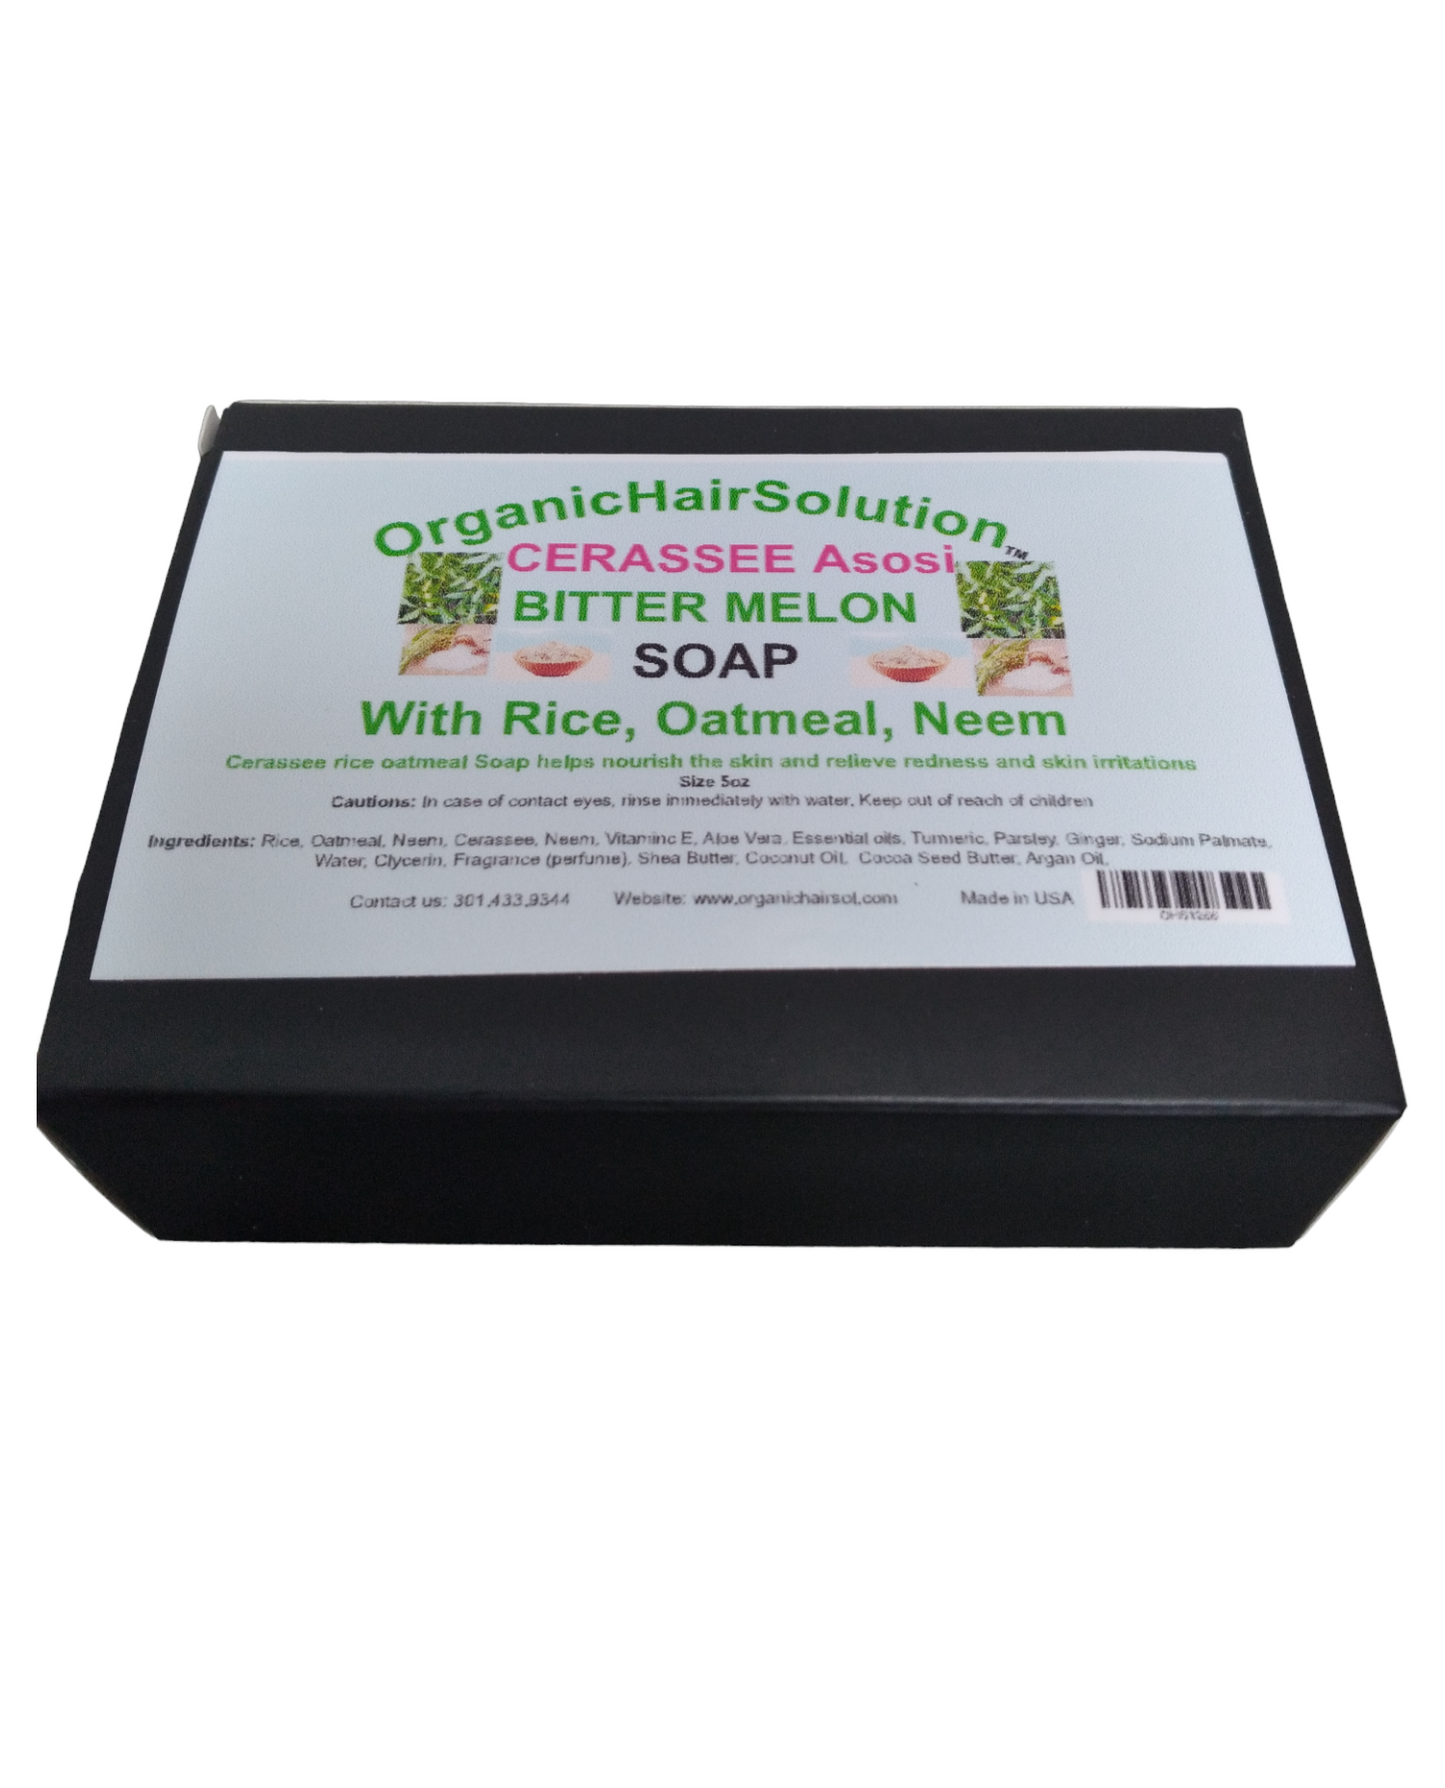 ASOSI OR BITTER MELON OR CARASEE SOAP with Rice-Oatmeal -Neem- Ginger & Parsley - Organic Hair Solution, LLC